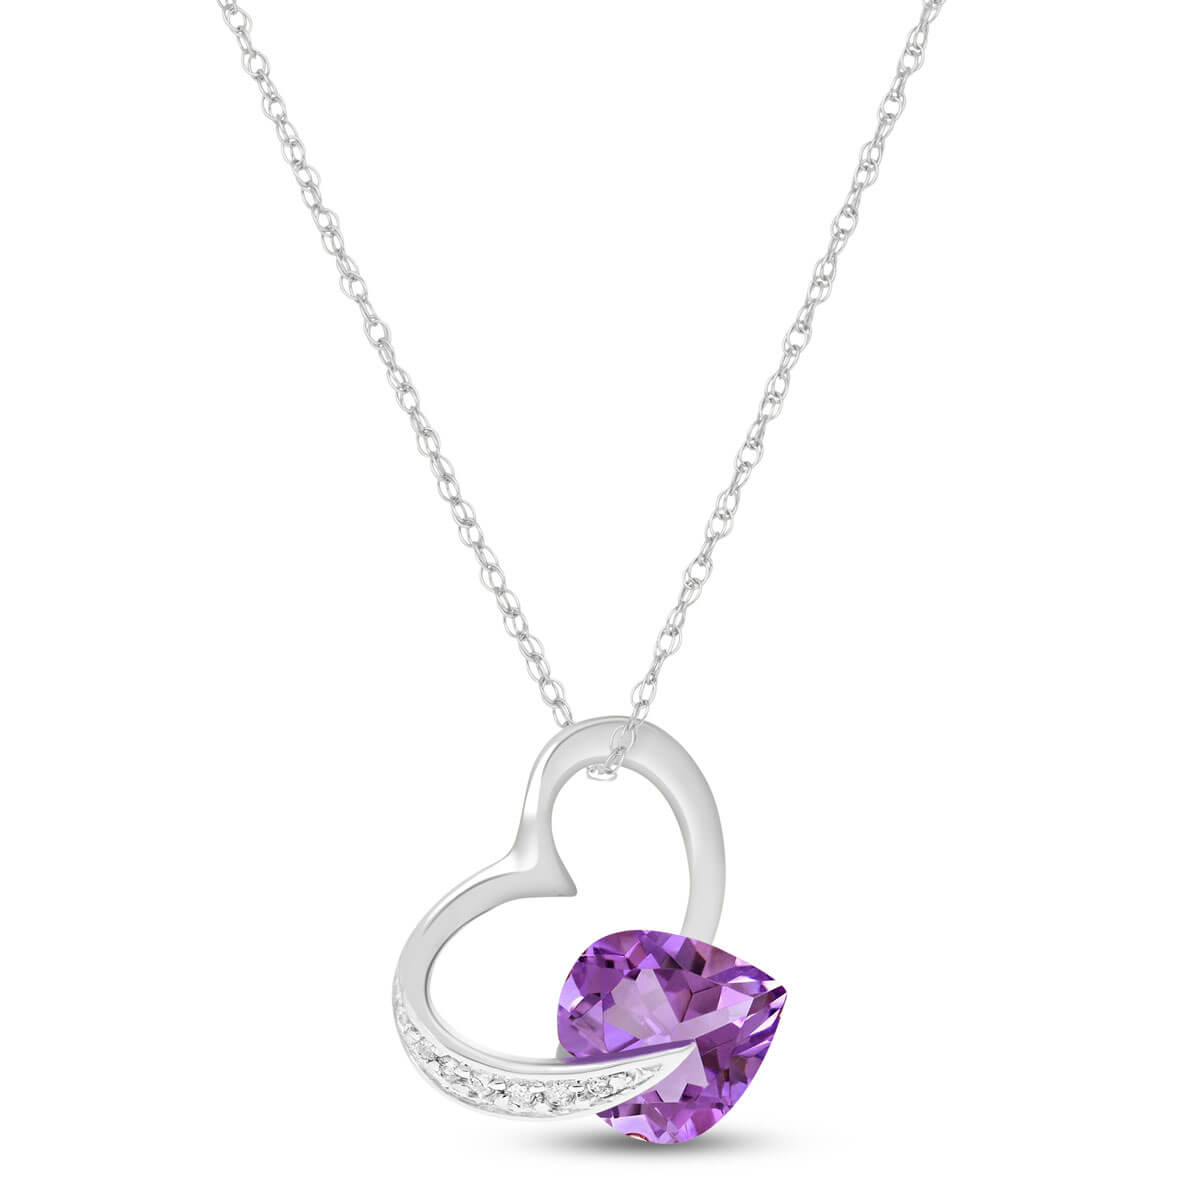 Amethyst & Diamond Heart Pendant Necklace in 9ct White Gold